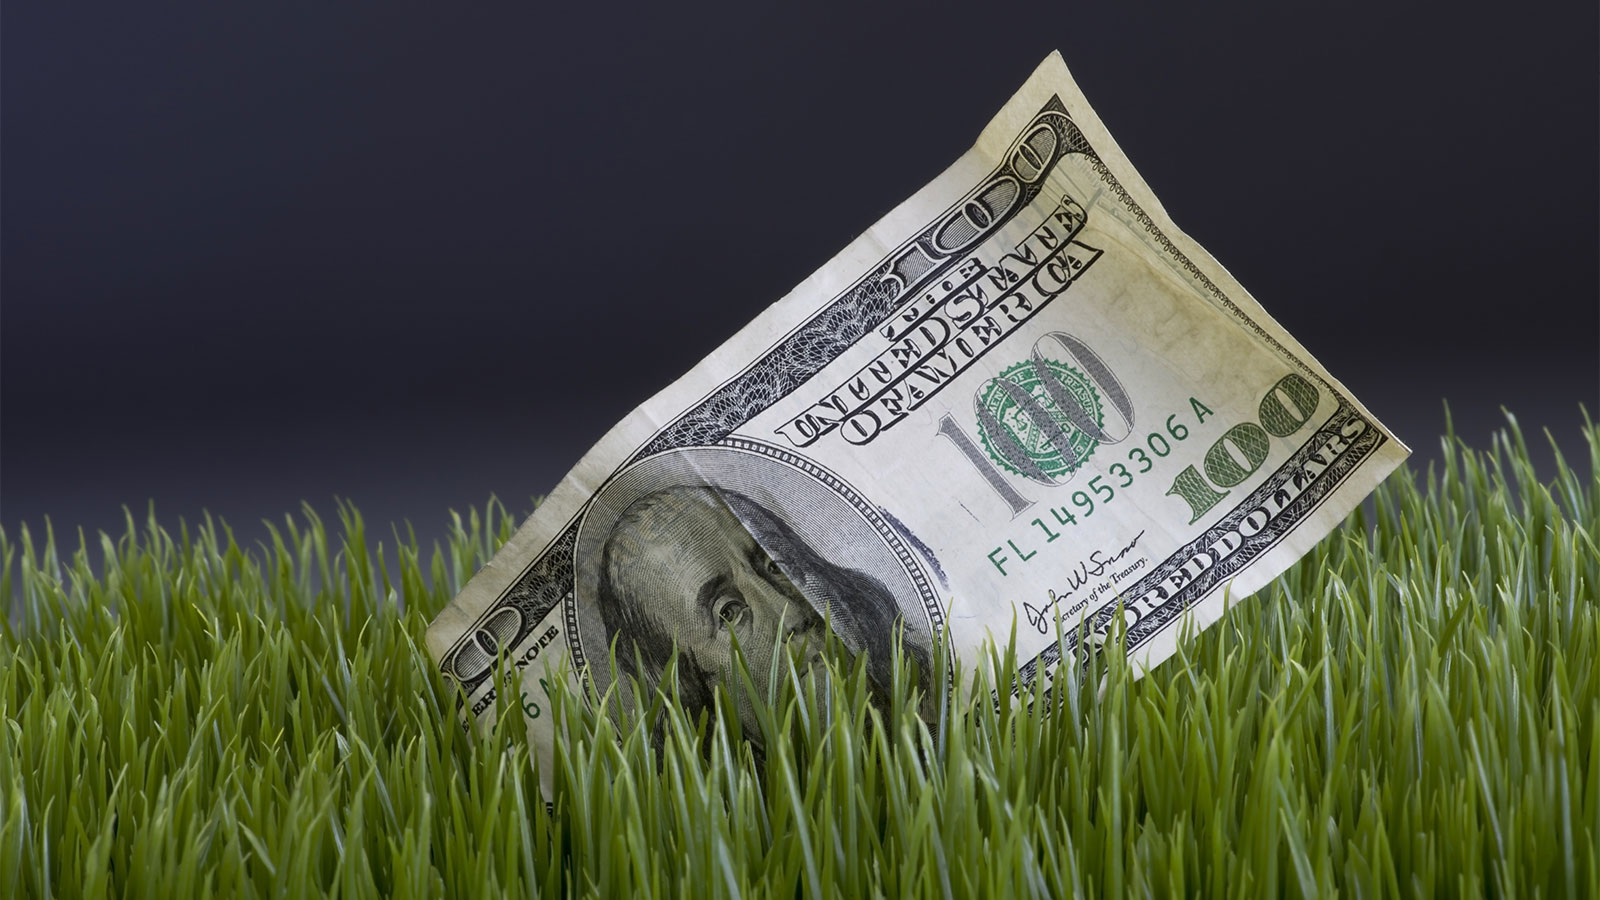 Cash in the grass